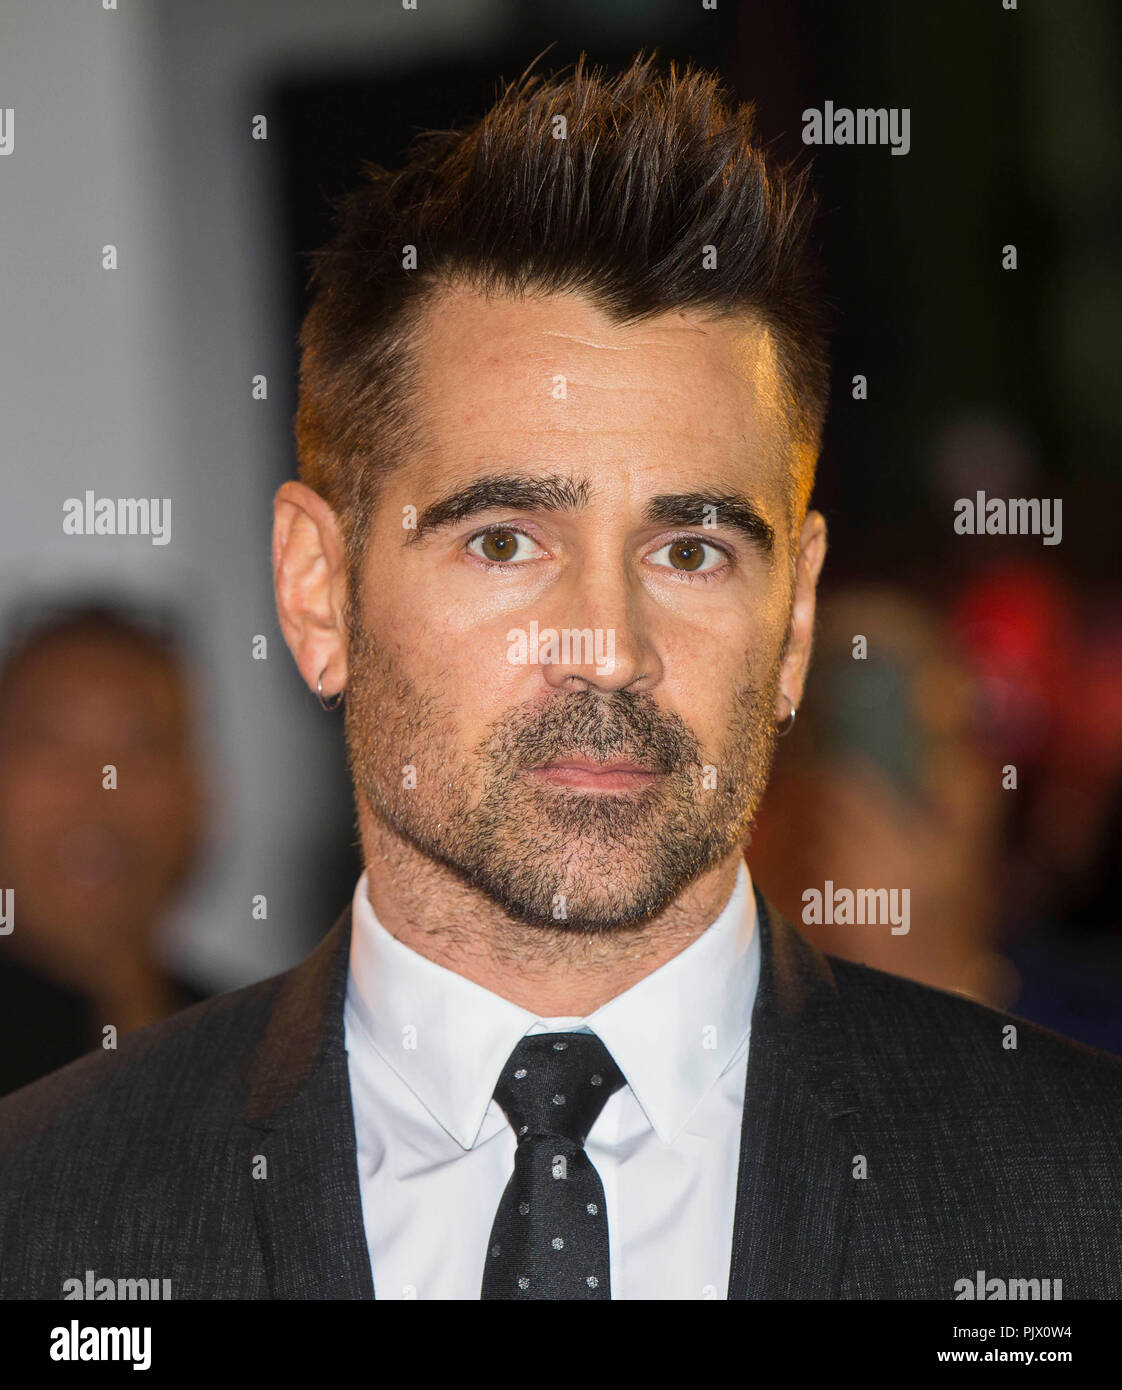 Toronto, Canada. 8th Sep, 2018. Actor Colin Farrell poses for photos before the premiere of the film 'Widows' during the 2018 Toronto International Film Festival in Toronto, Canada, Sept. 8, 2018. Credit: Zou Zheng/Xinhua/Alamy Live News Stock Photo